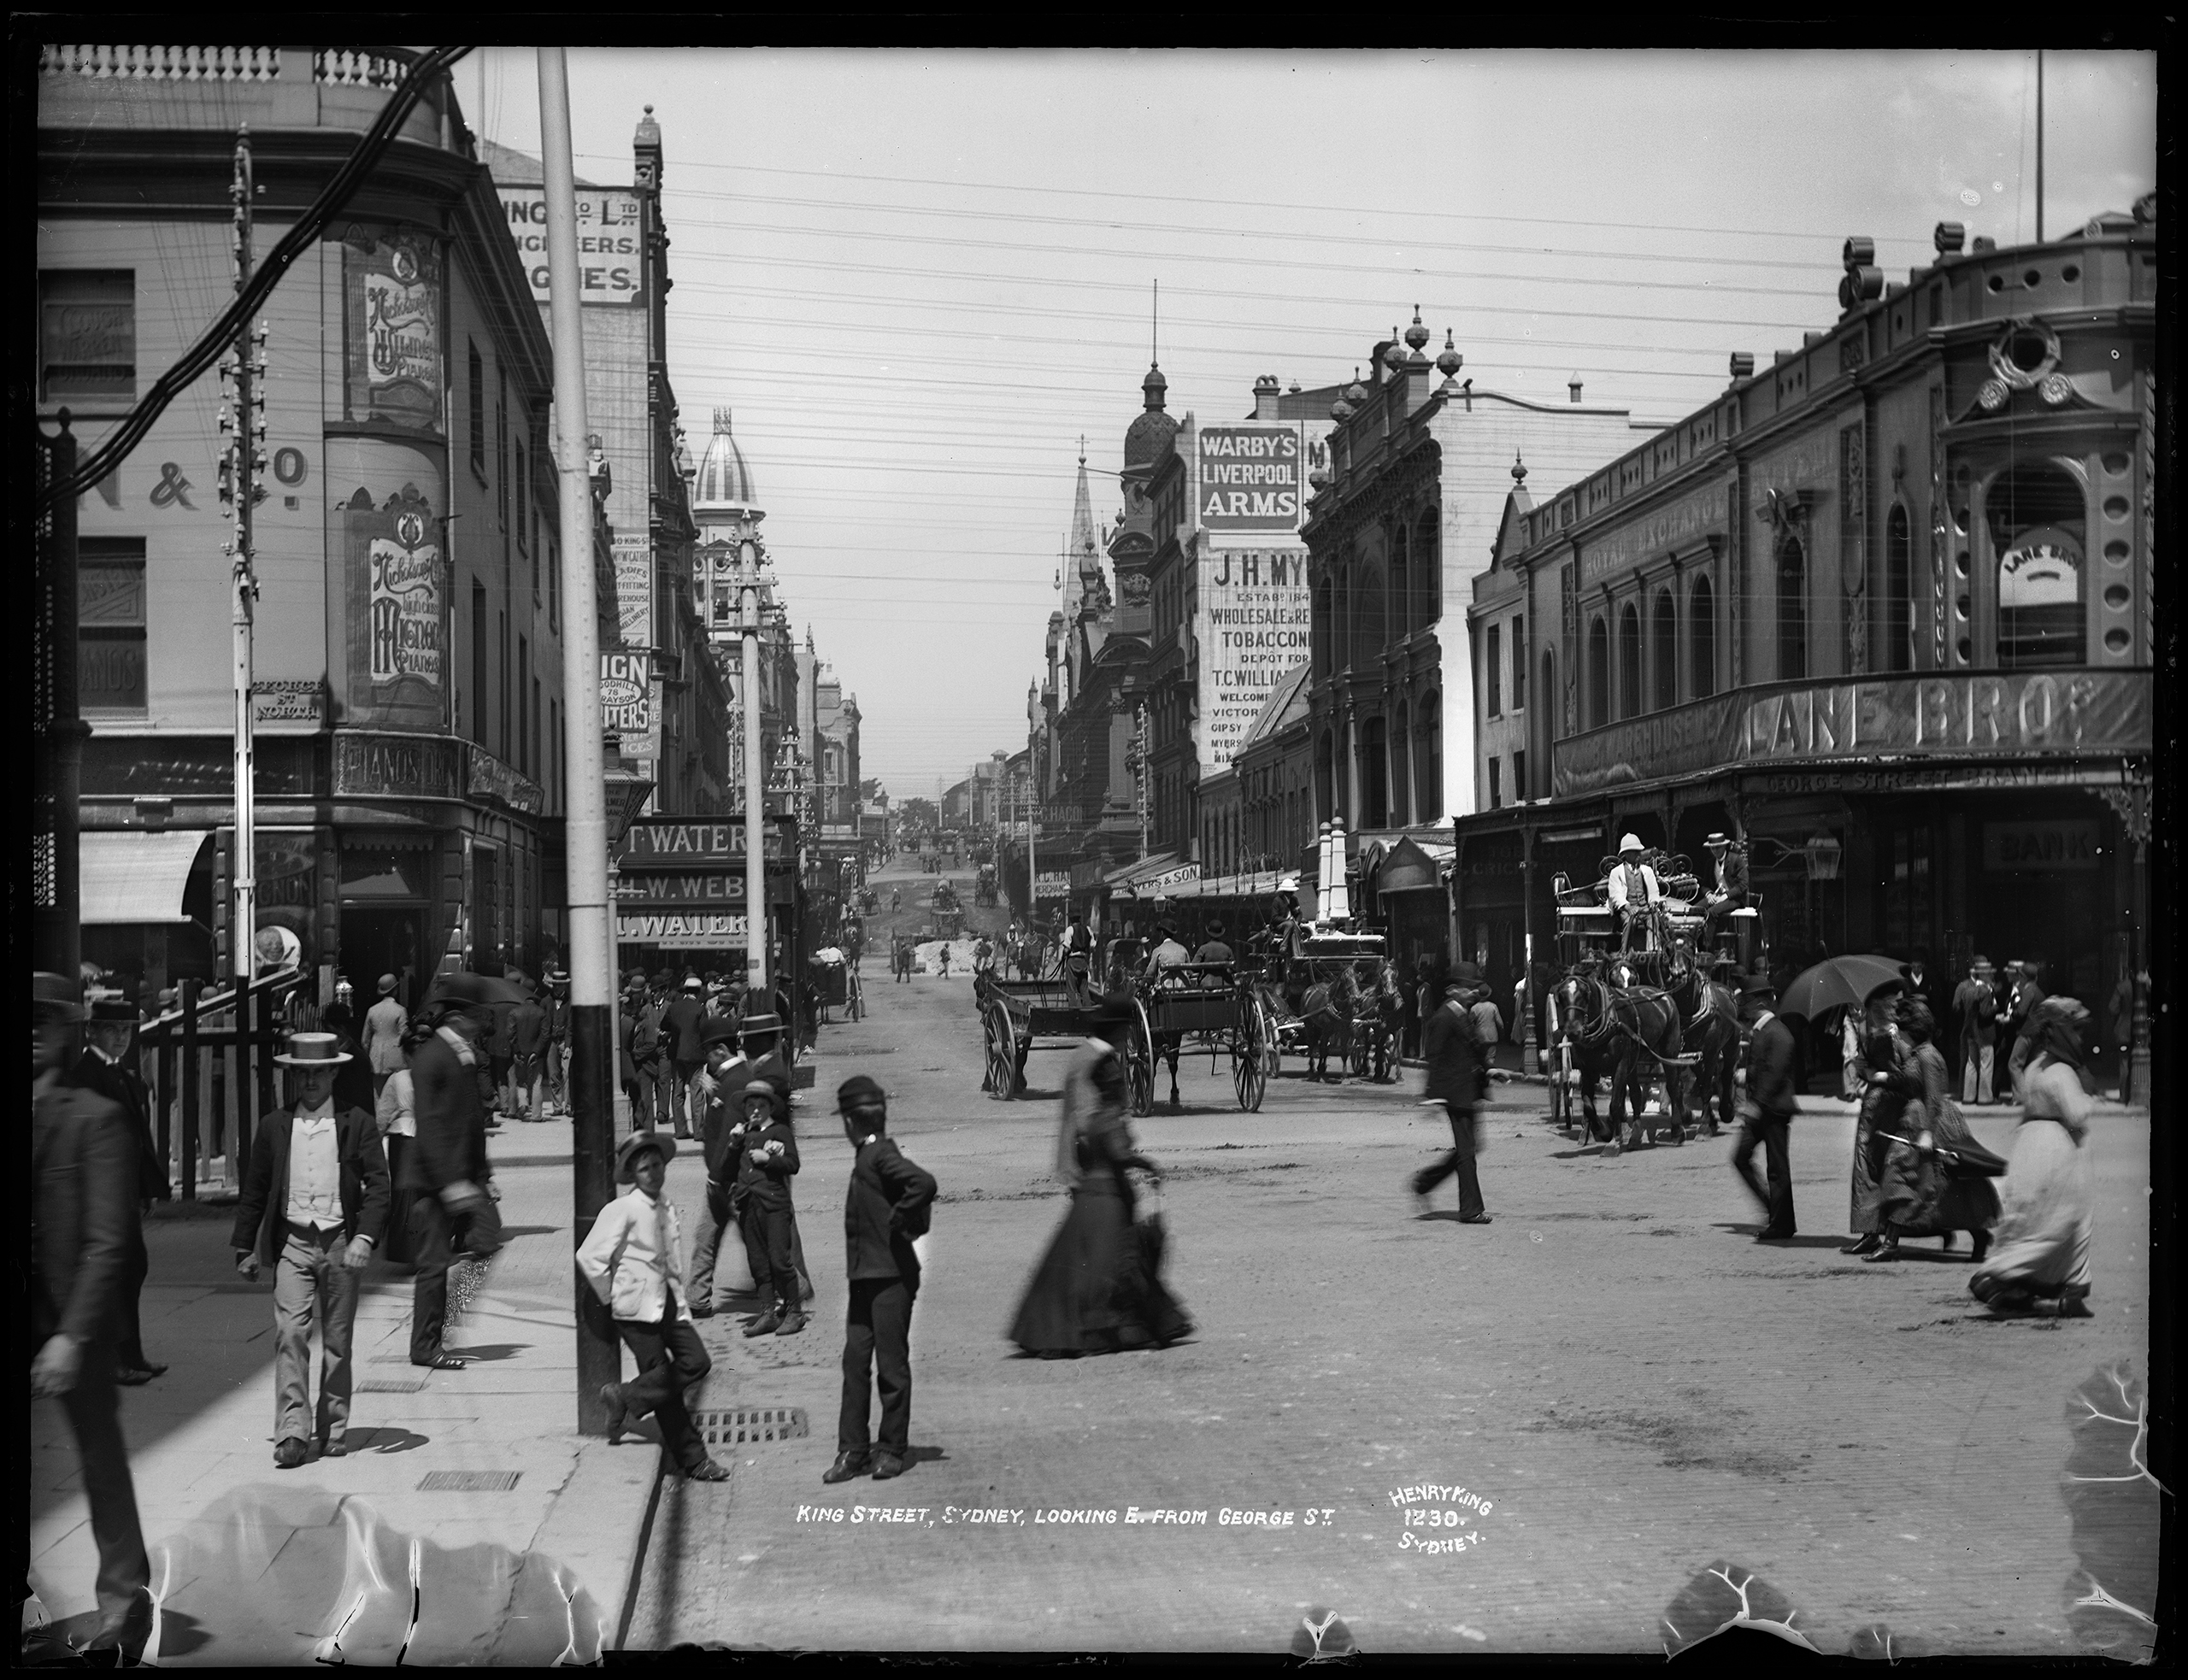 'King Street, Sydney, Looking East from George Street' by Henry King